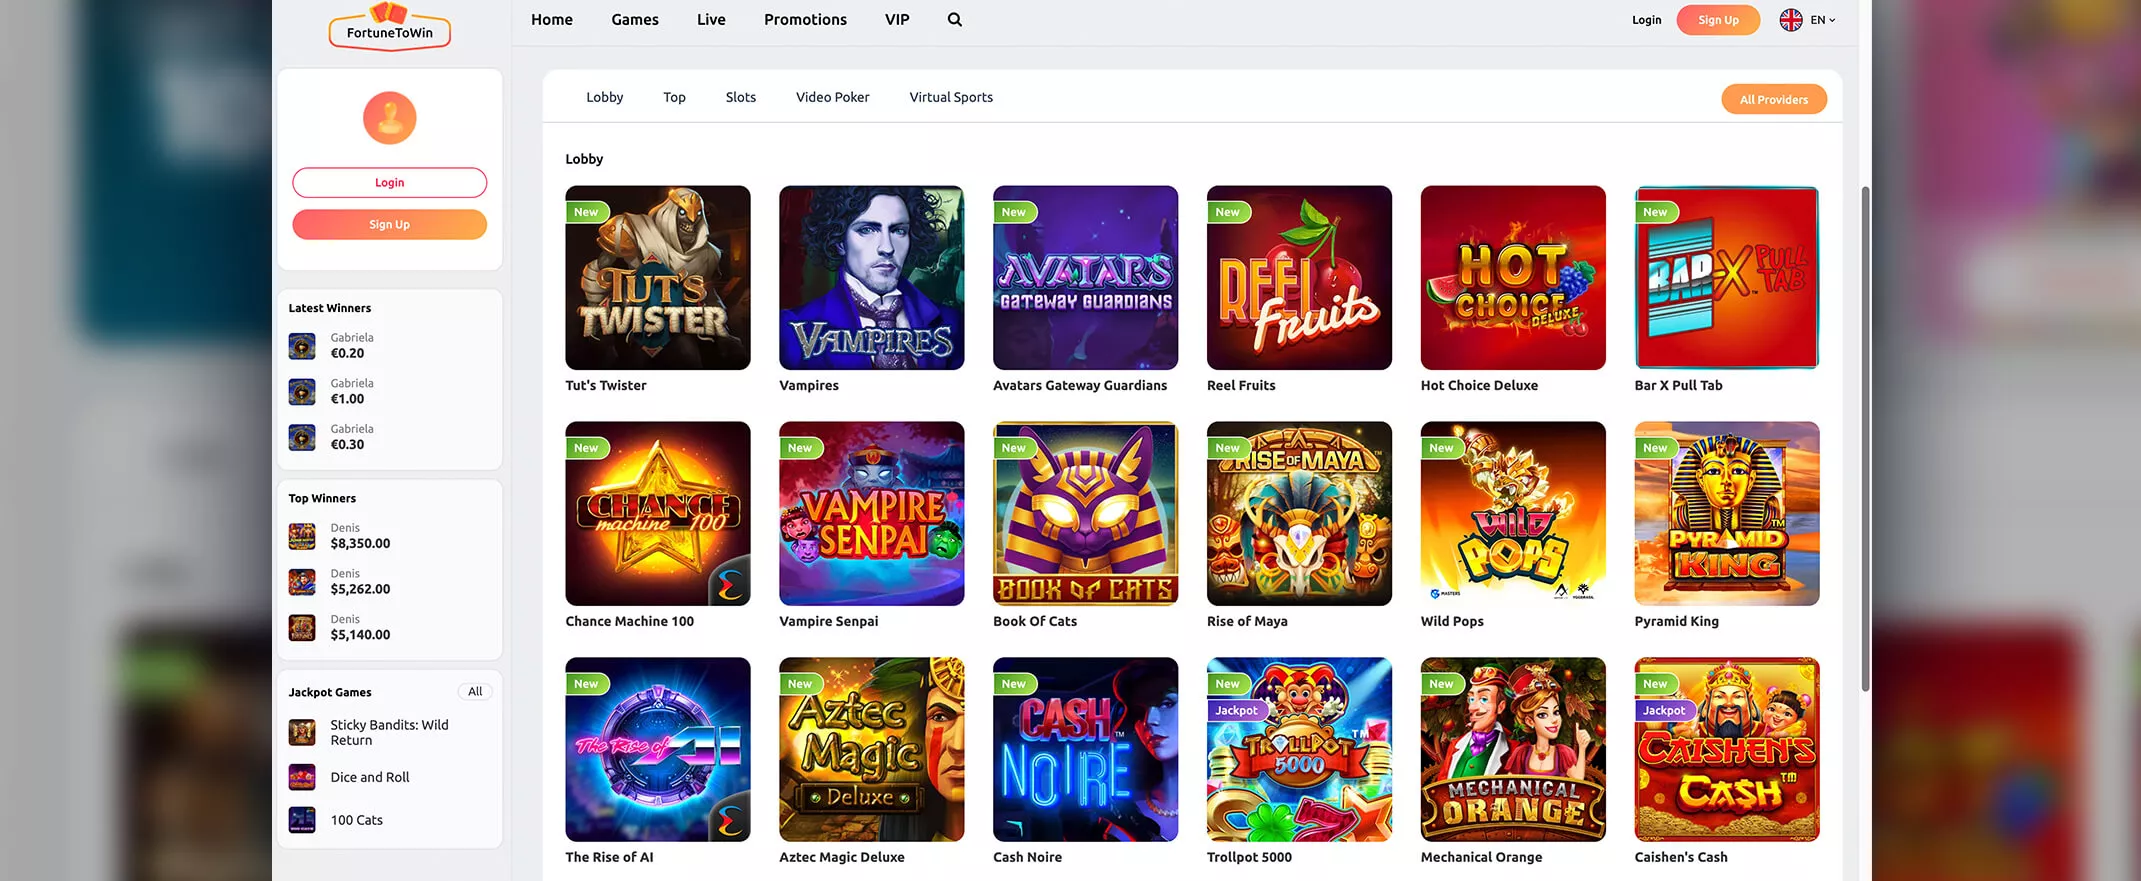 Fortune to Win screenshot of the Games